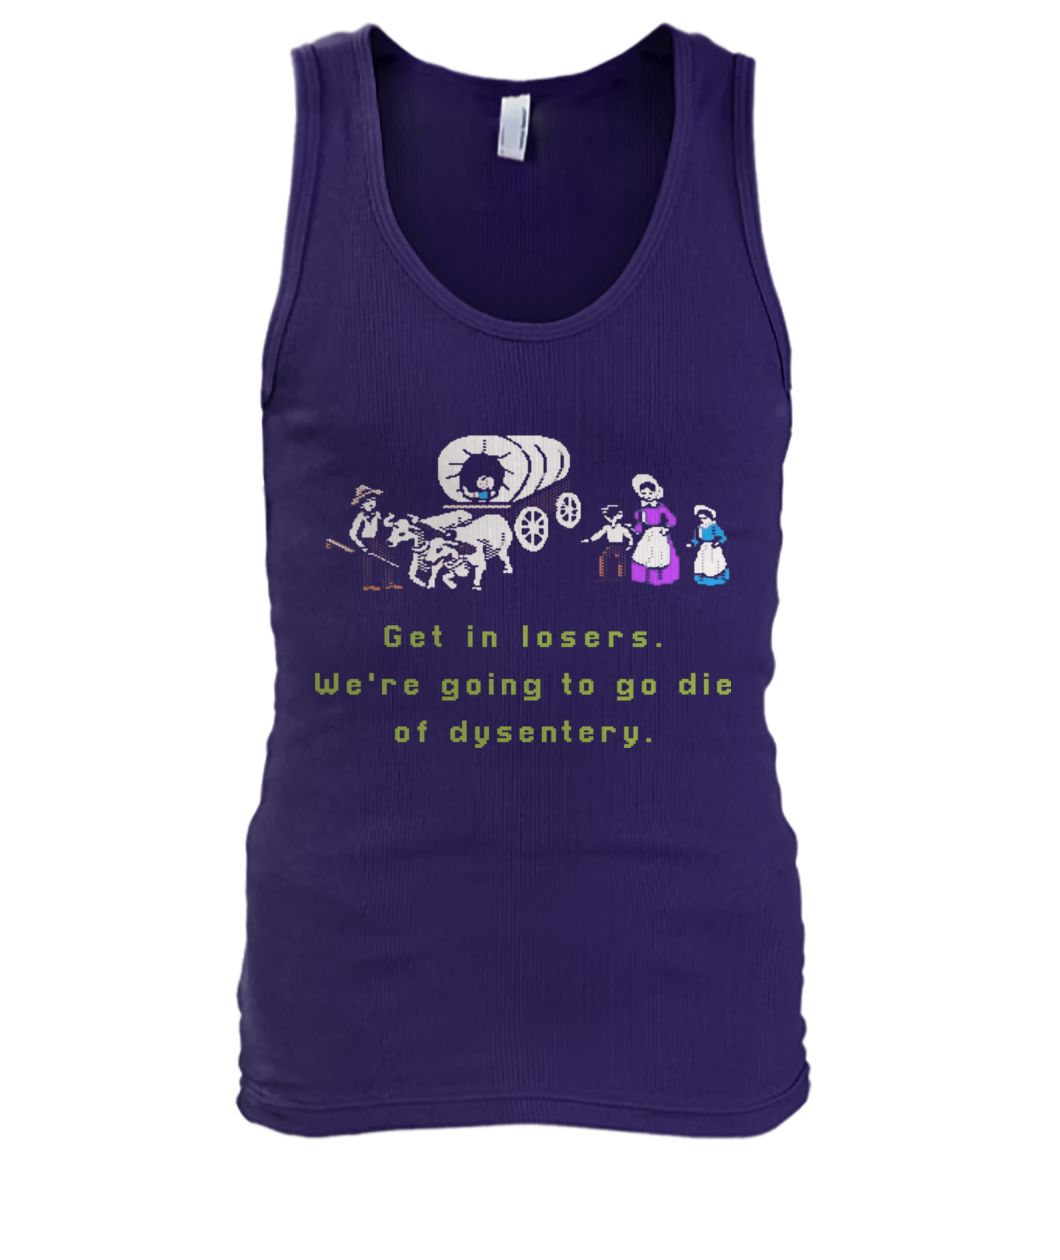 Get in losers we are going to go die of dysentery men's tank top